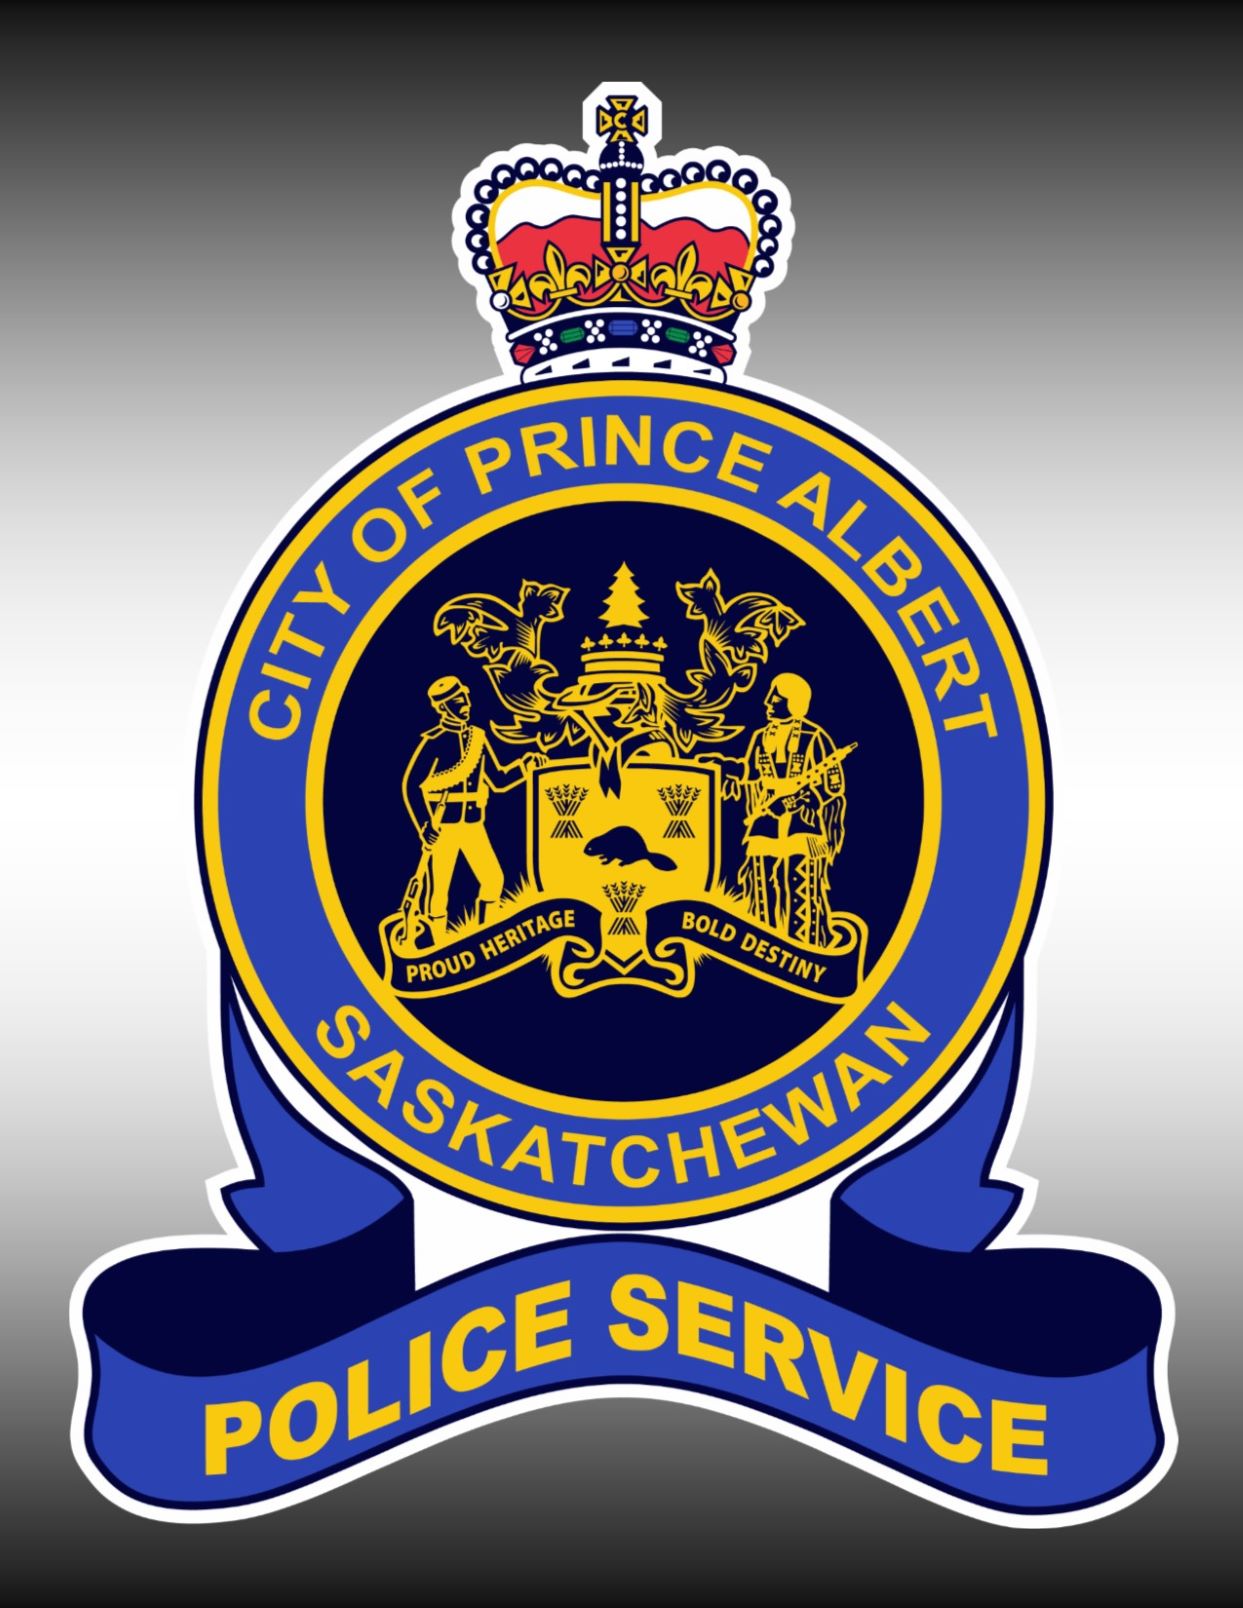 Media Release - Prince Albert Police Service Opens Renovated Downtown Substation Location